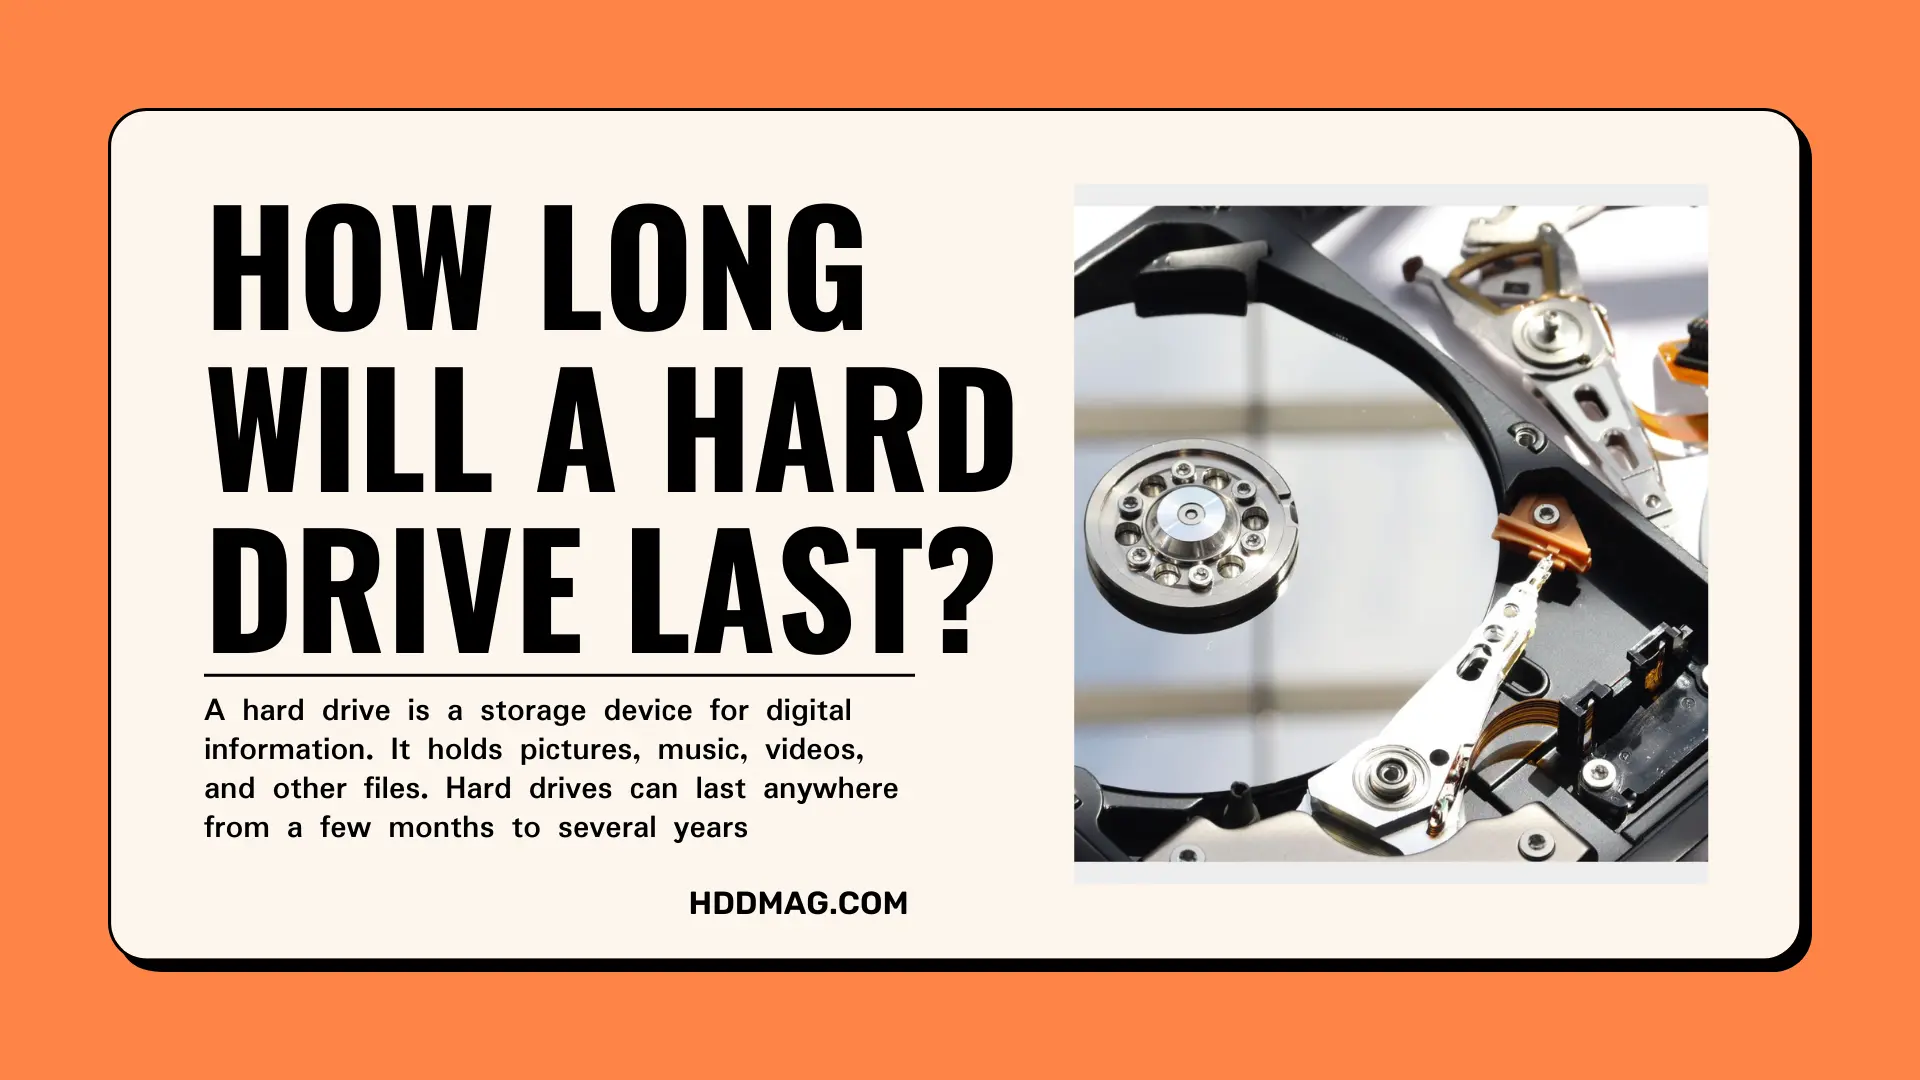 How Long Will a Hard Drive Last